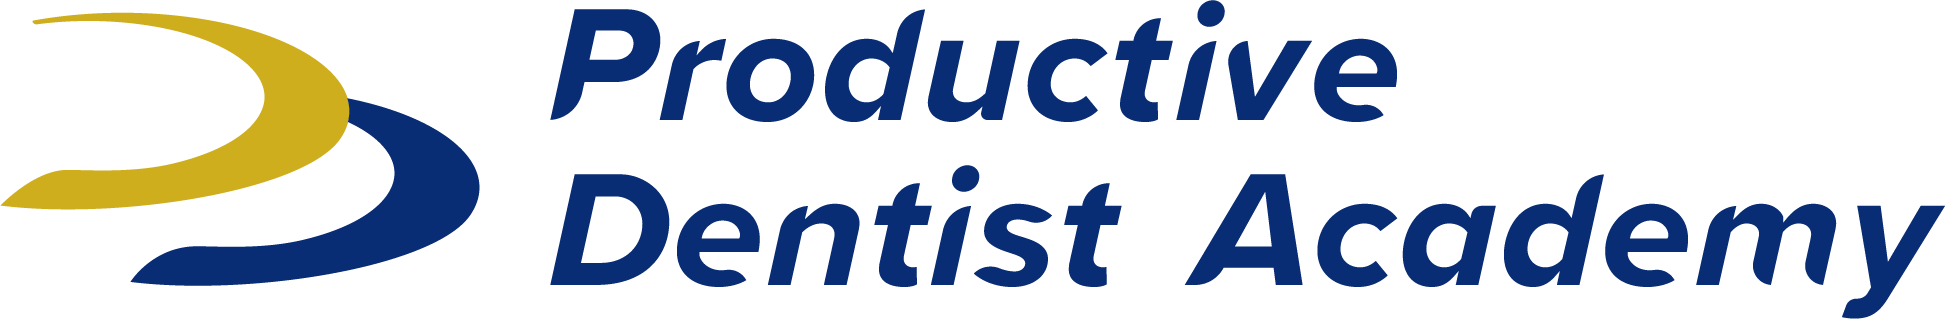 Productive Dentists Academy Introduces Practice Assessment 